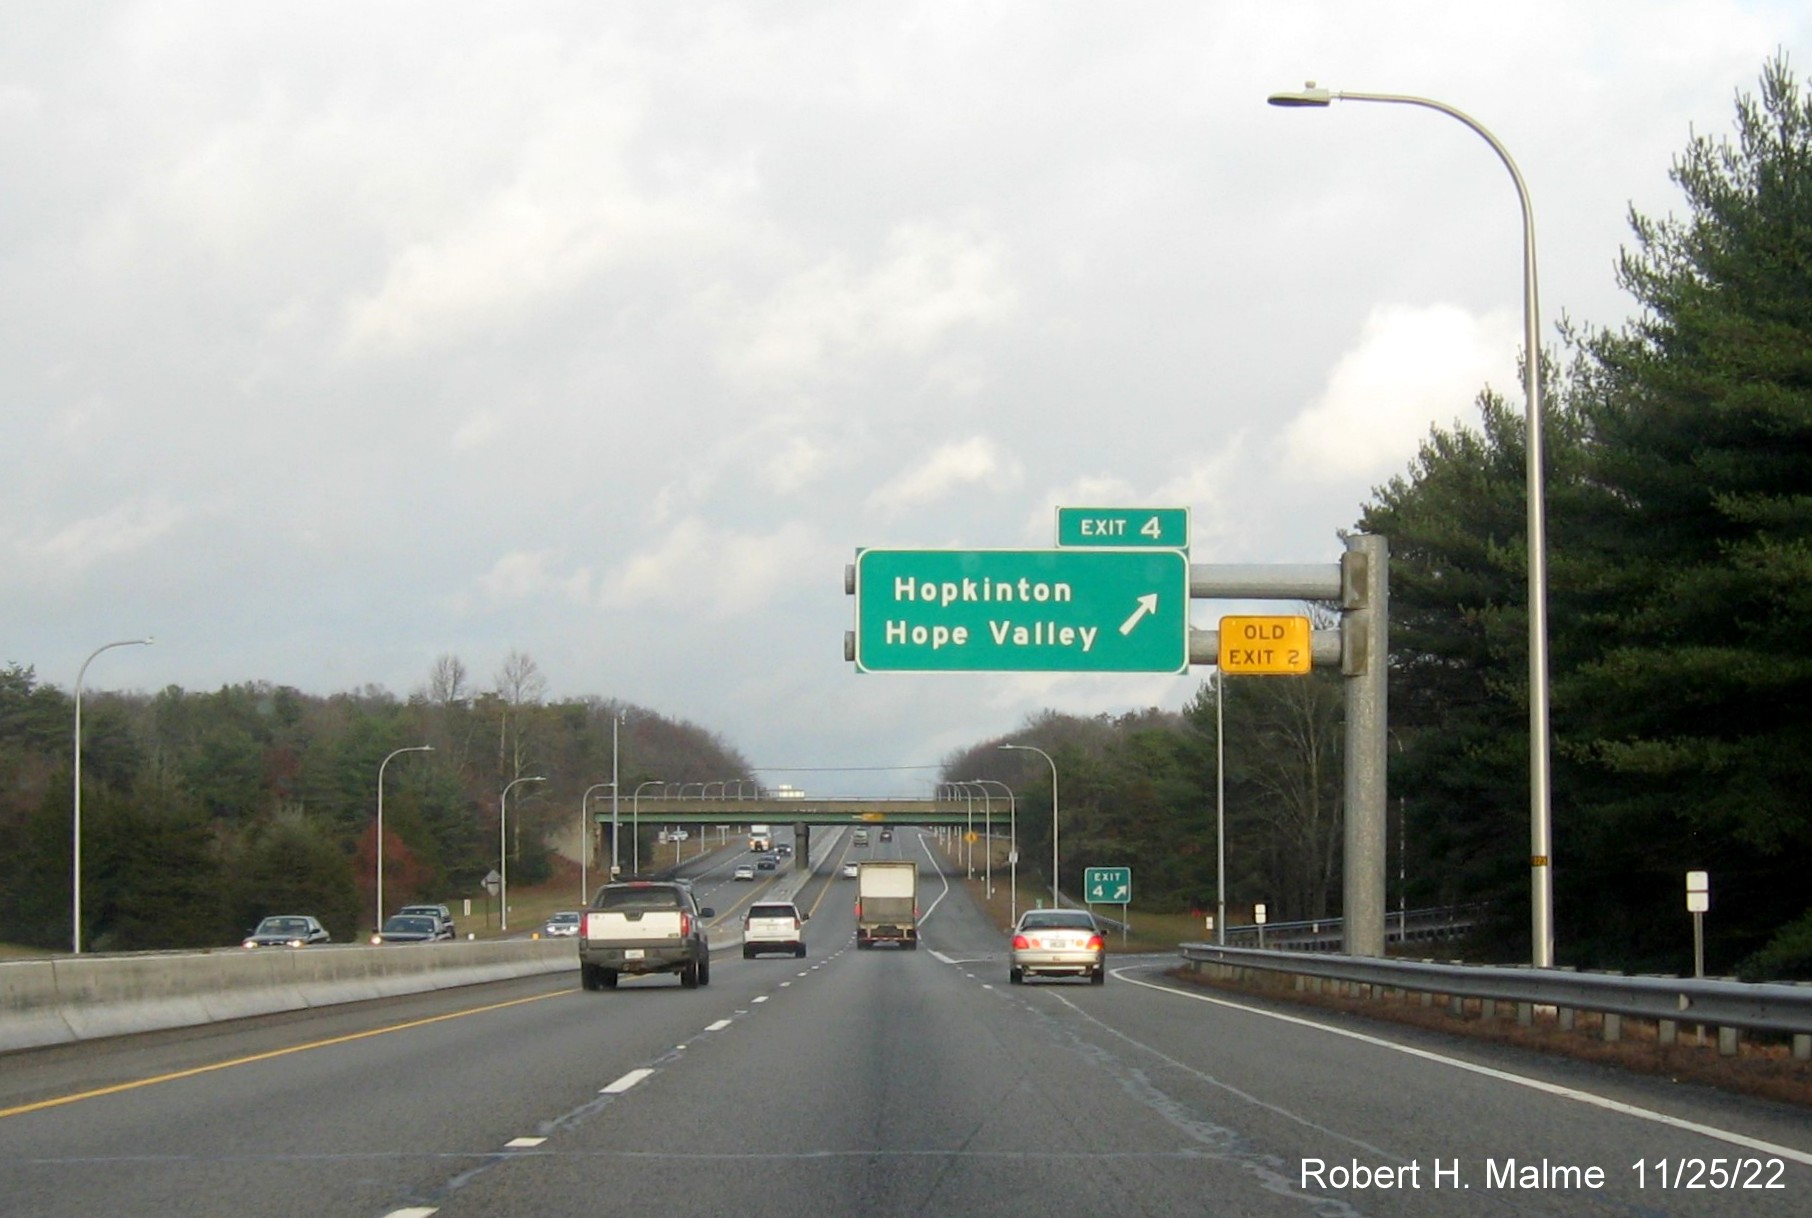 Image of ground mounted 1/2 mile advance sign for the Hopkinton exit with new milepost based exit numbers and yellow Old Exit 2 sign above exit tab on I-95 South, November 2022